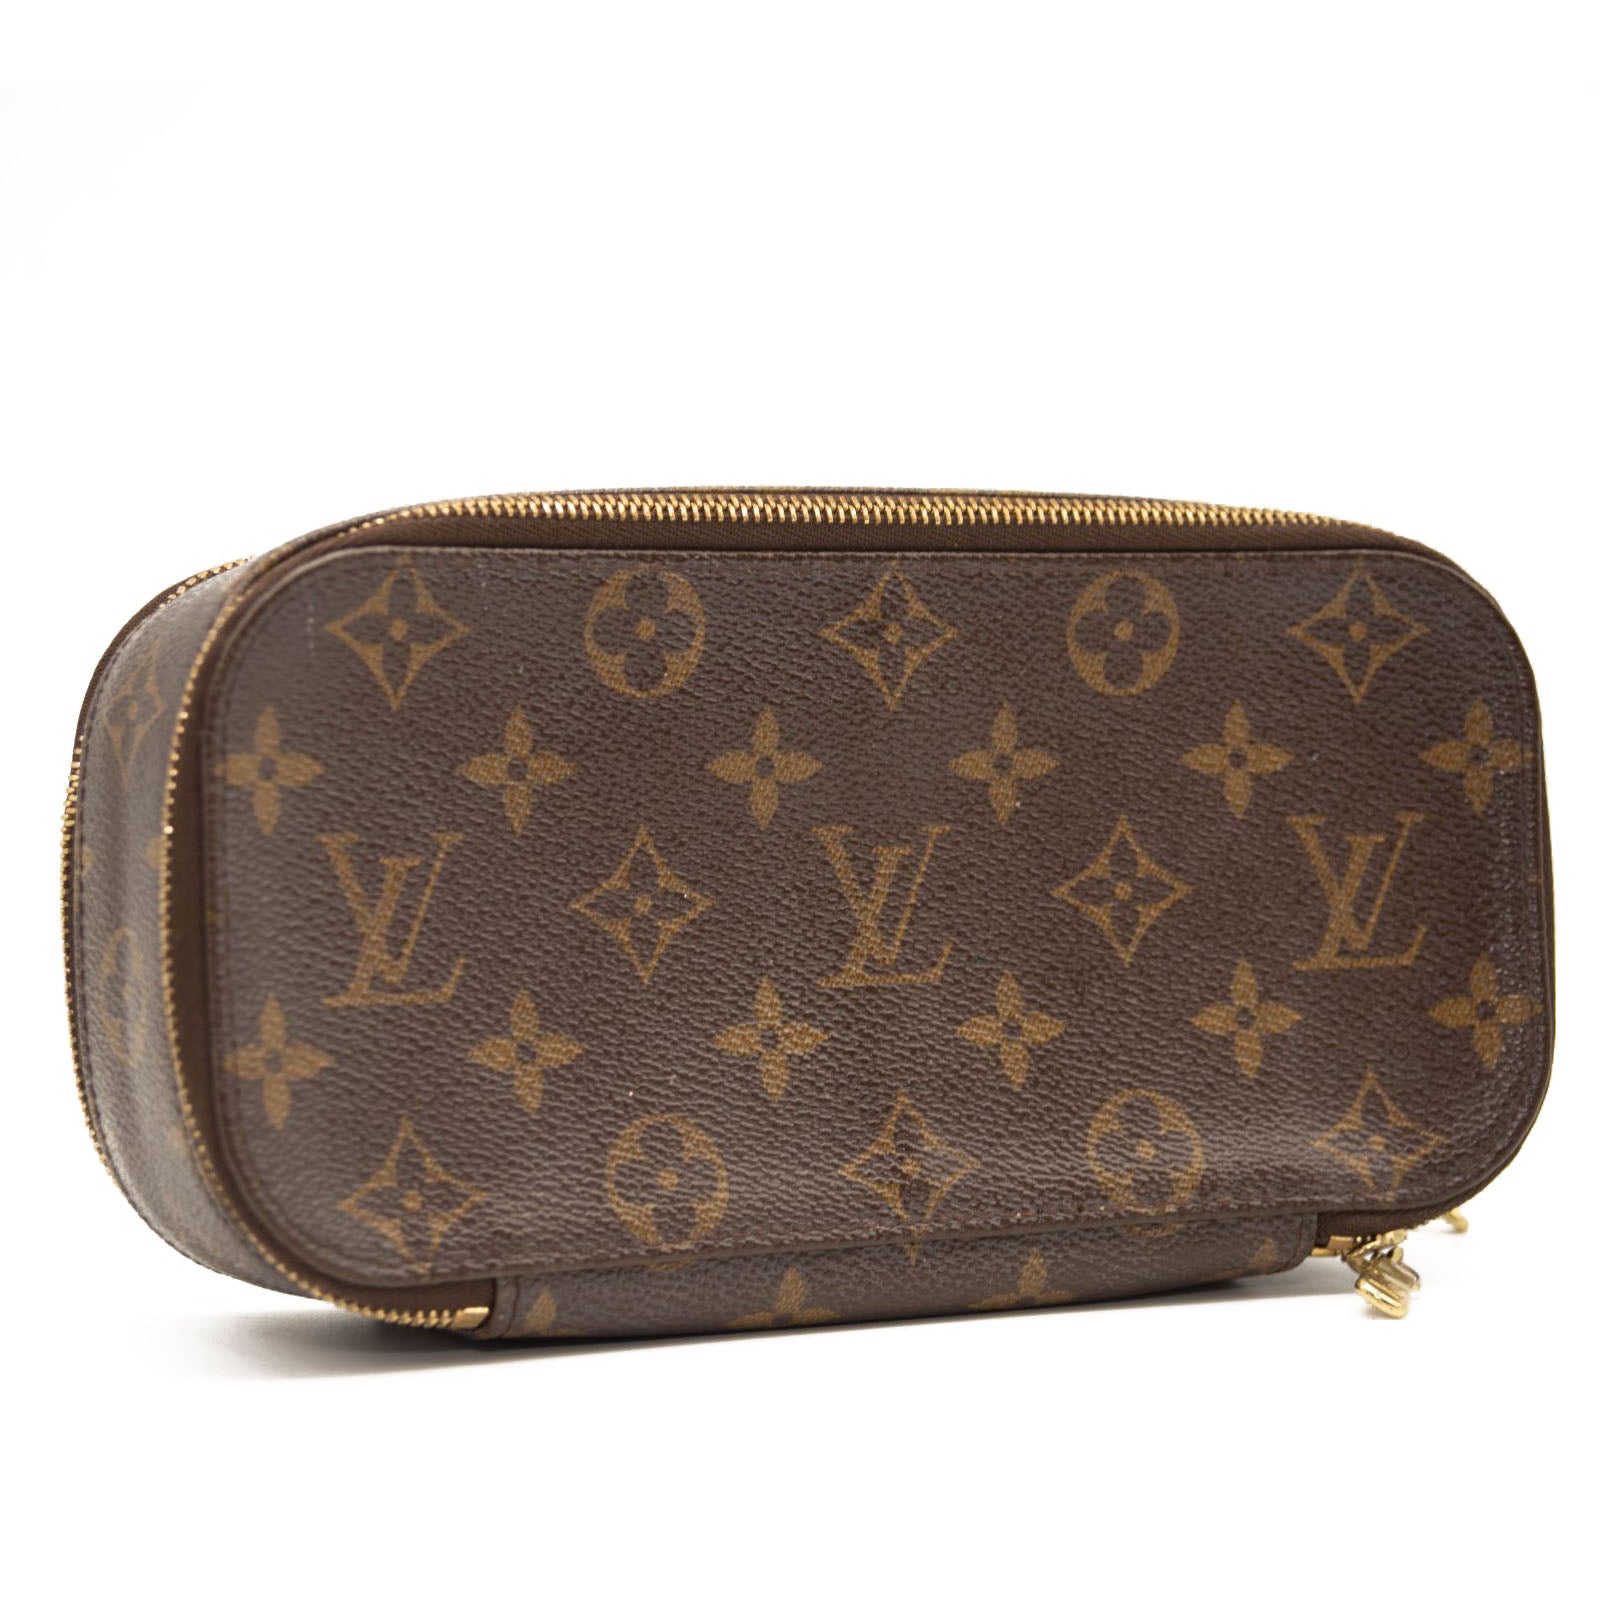 Louis Vuitton Cosmetic Pouch in Monogram - SOLD